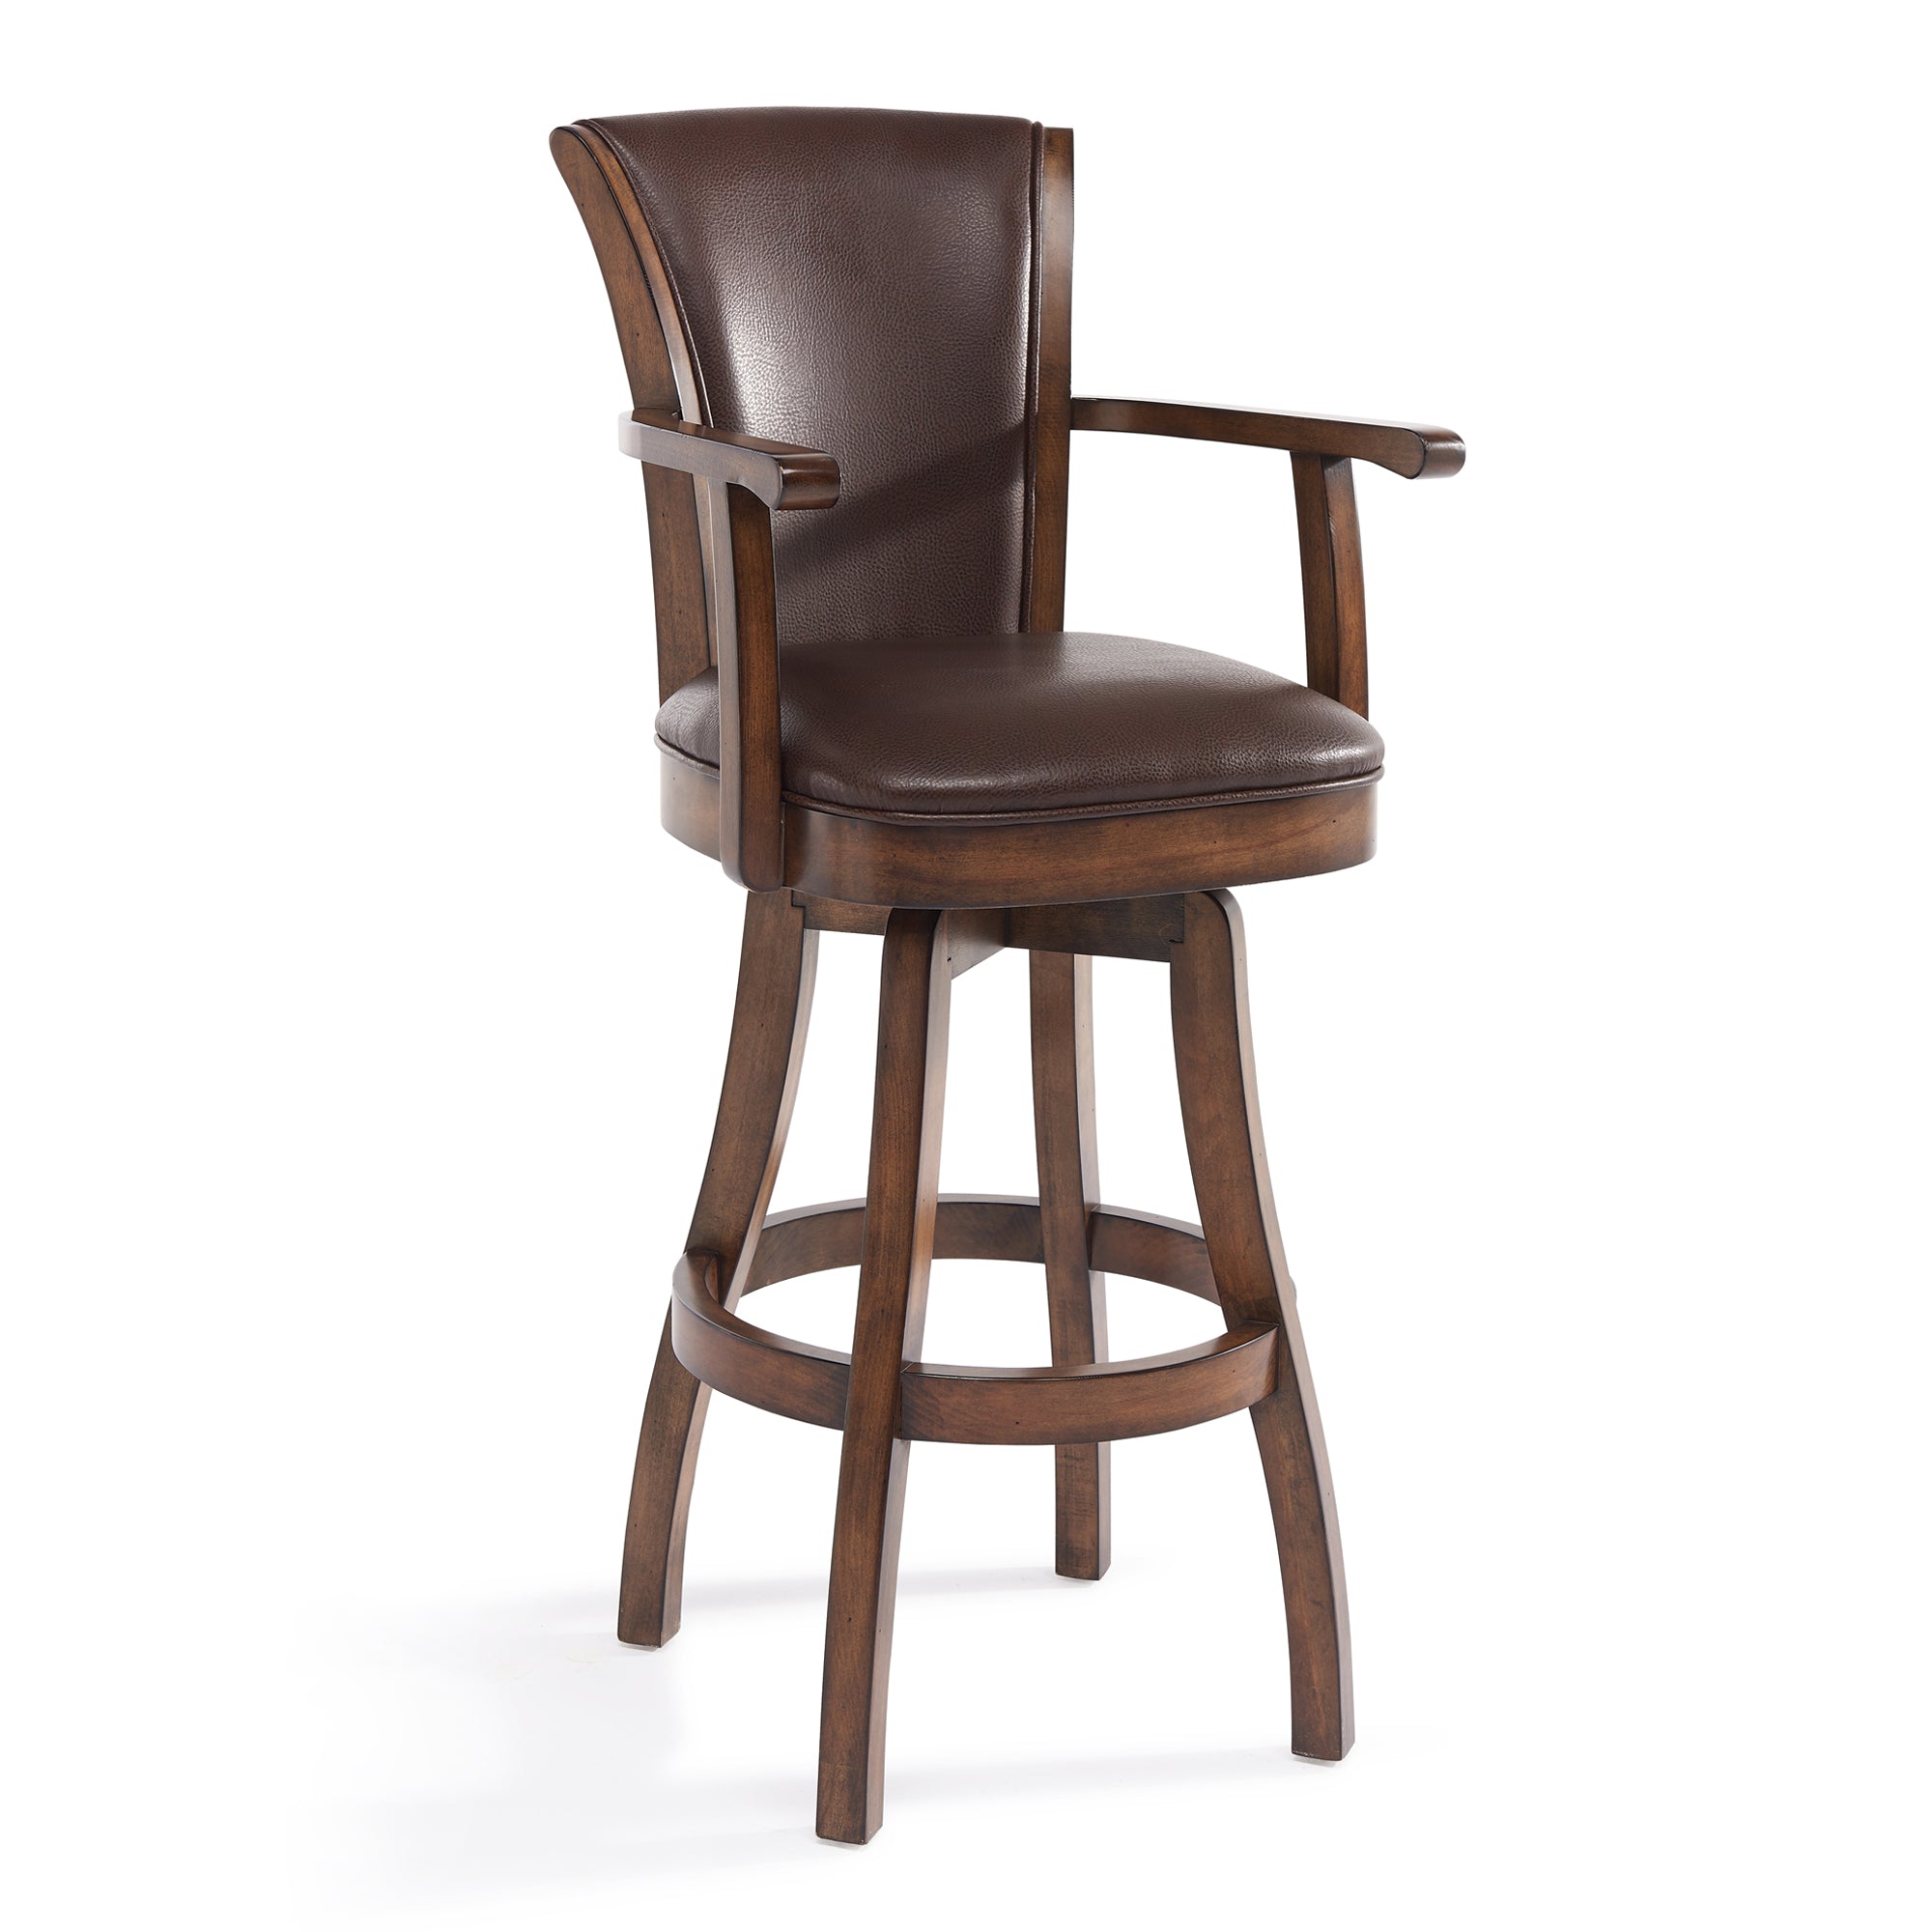 Armen Living Lcrabaarkach26 Raleigh Arm 26" Counter Height Swivel Wood Barstool In Chestnut Finish And Kahlua Faux Leather